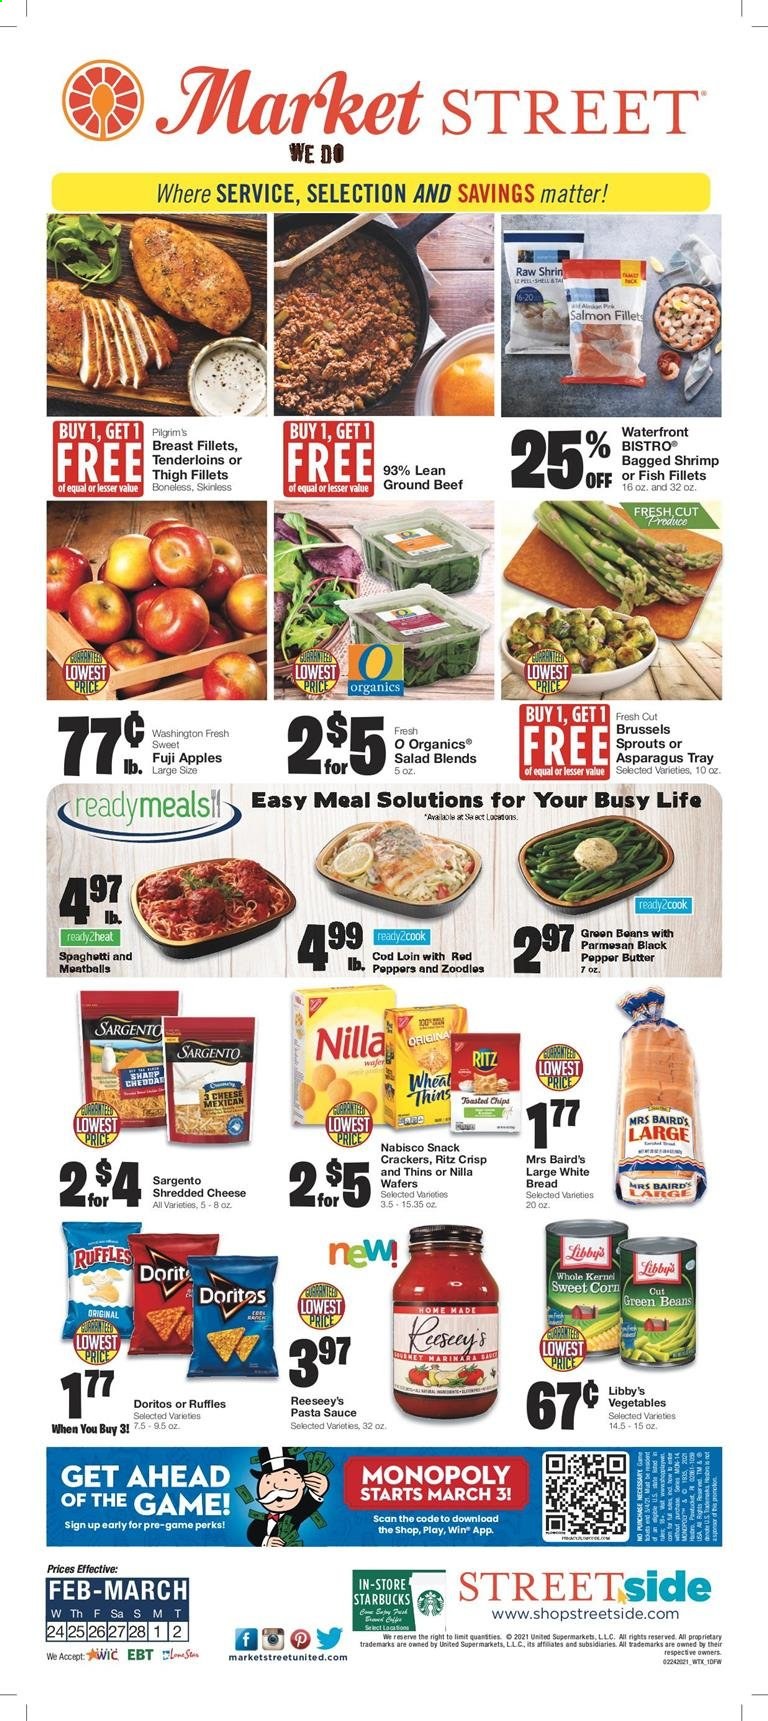 thumbnail - Market Street Flyer - 02/24/2021 - 03/02/2021 - Sales products - green beans, Fuji apple, bread, white bread, apples, fish fillets, salmon, fish, shrimps, meatballs, salad, sauce, shredded cheese, parmesan, Sargento, butter, beans, corn, brussel sprouts, sweet corn, wafers, crackers, RITZ, Doritos, snack, Thins, Ruffles, spaghetti, pasta sauce, Starbucks, beef meat, ground beef, tray. Page 1.